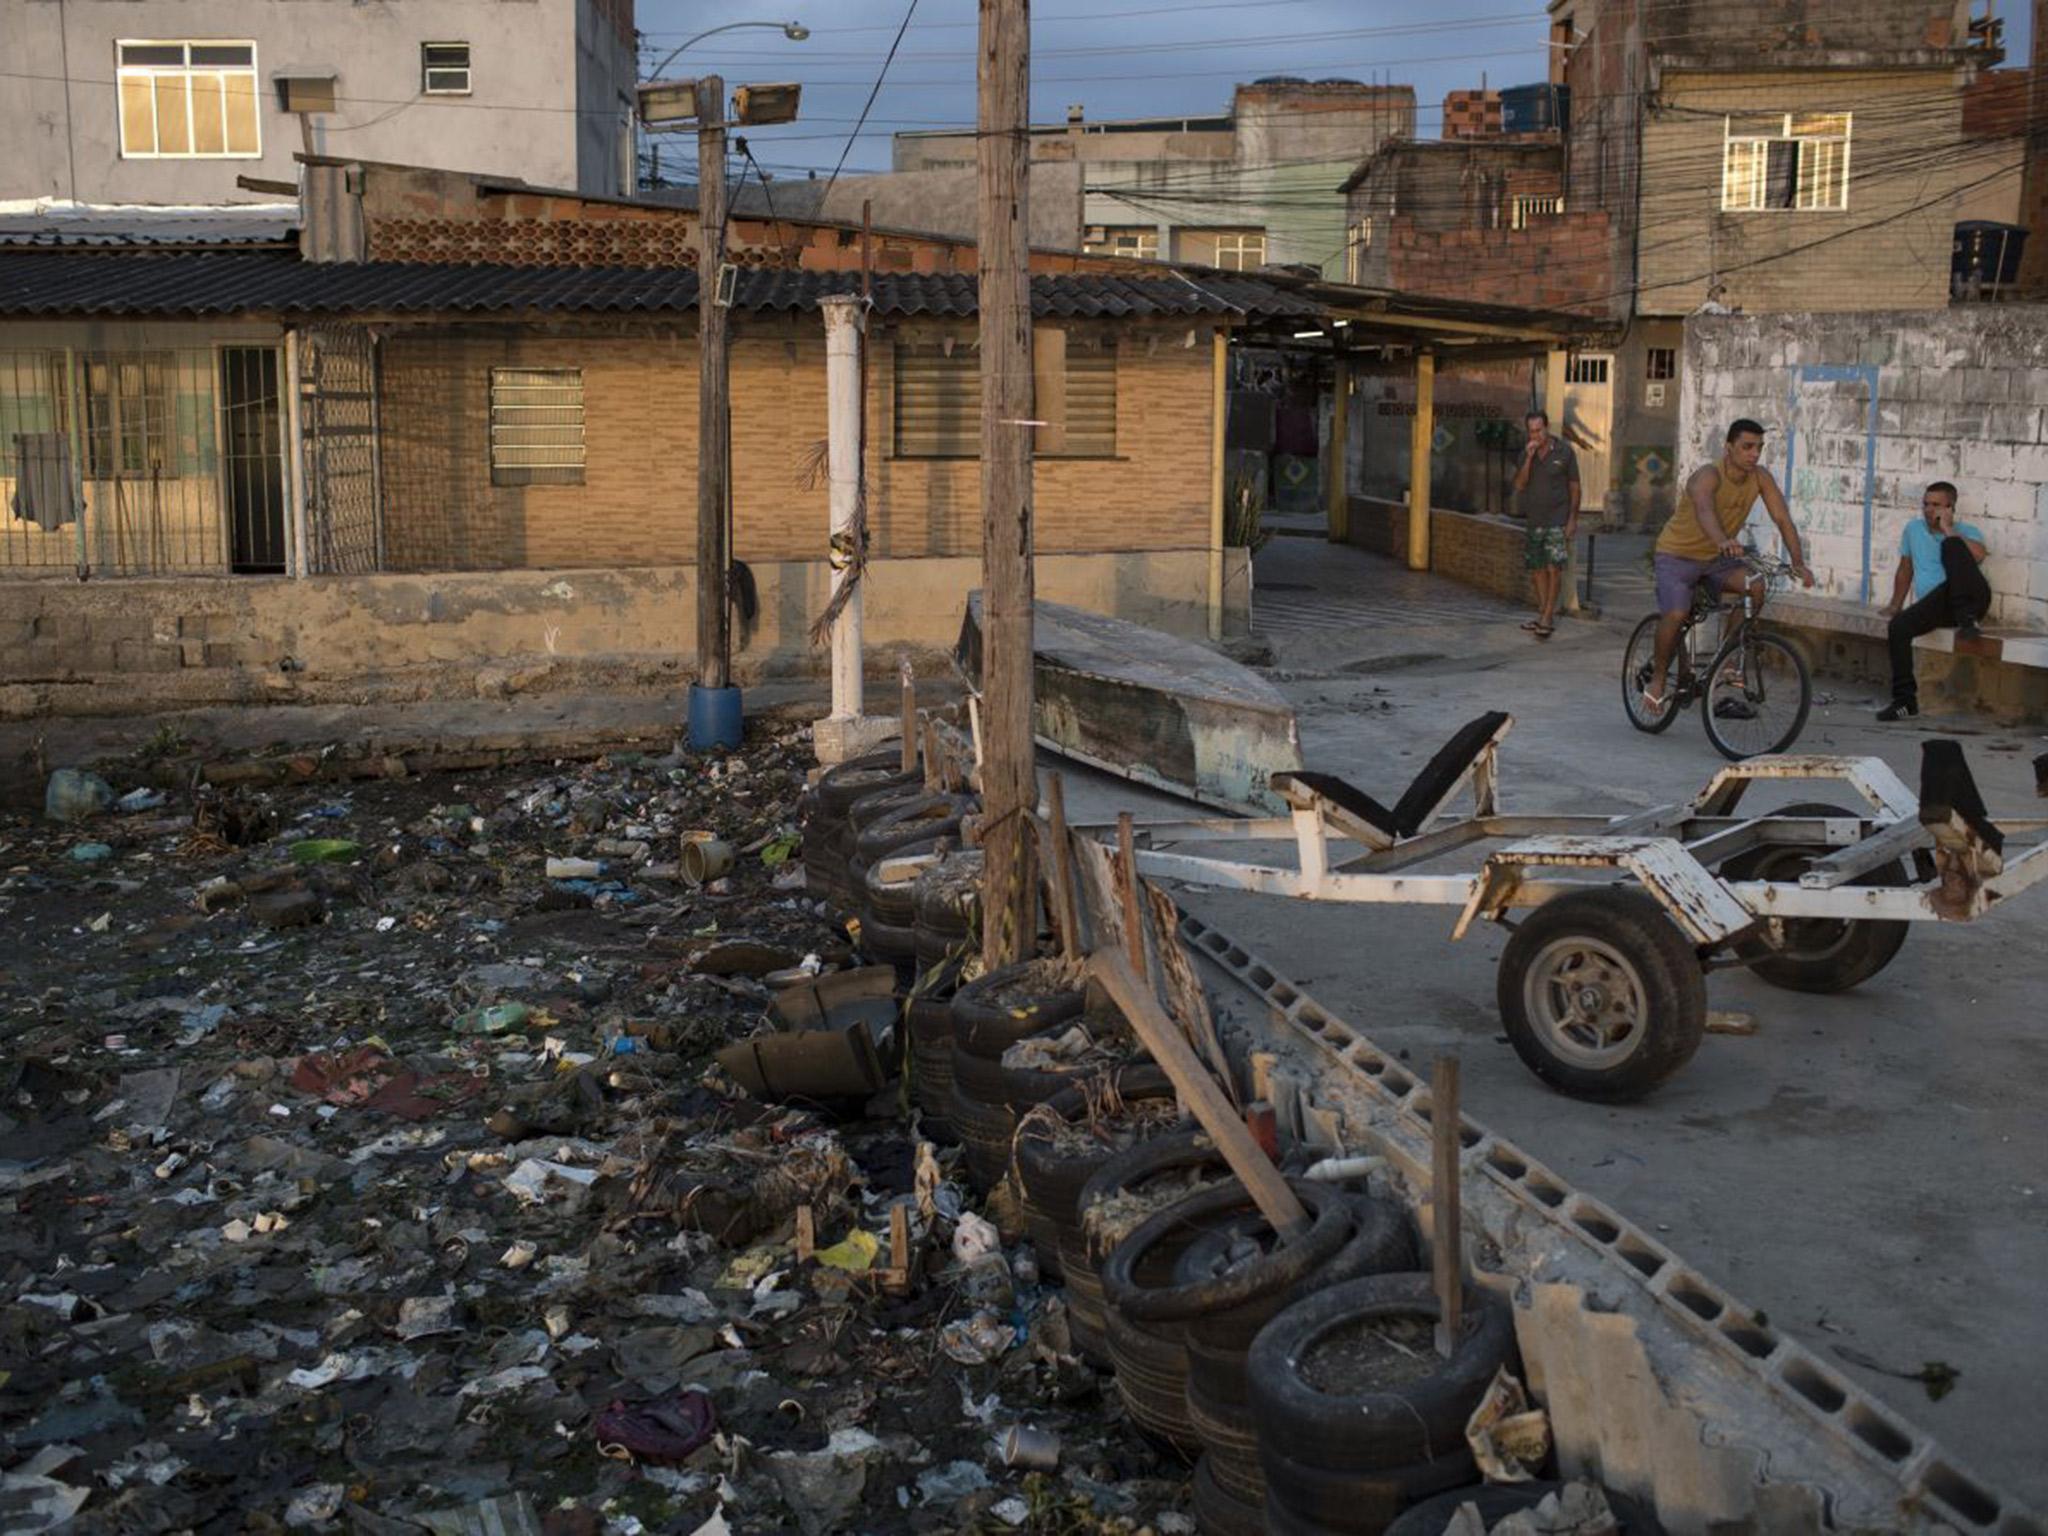 Houses stand next to the heavily polluted shore of Guanabara Bay